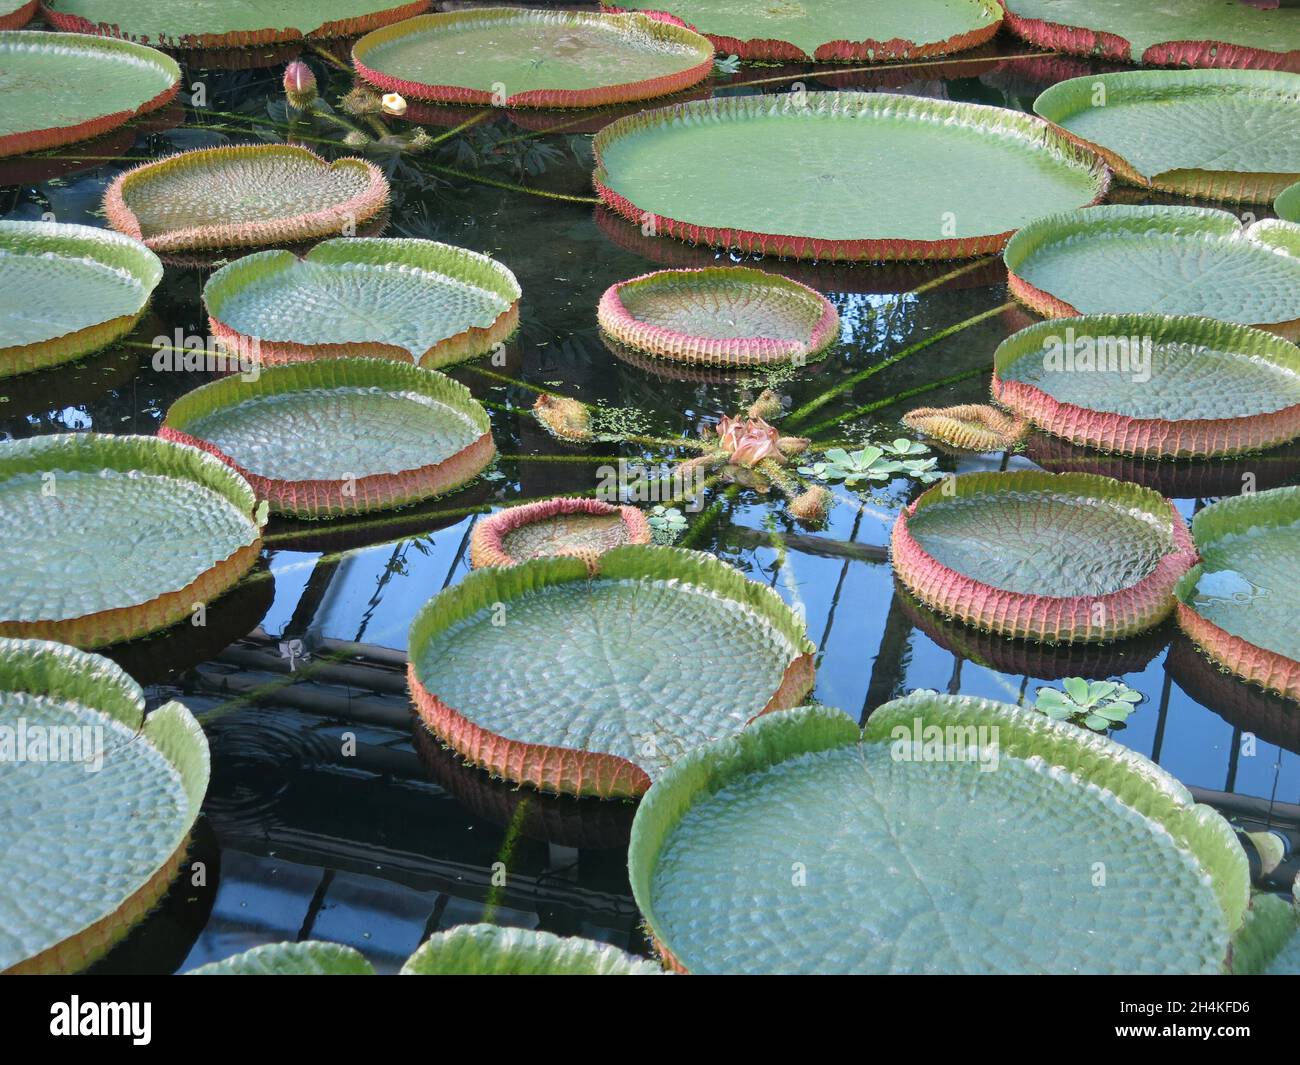 Giant water lily pads floating on the water; one of the amazing